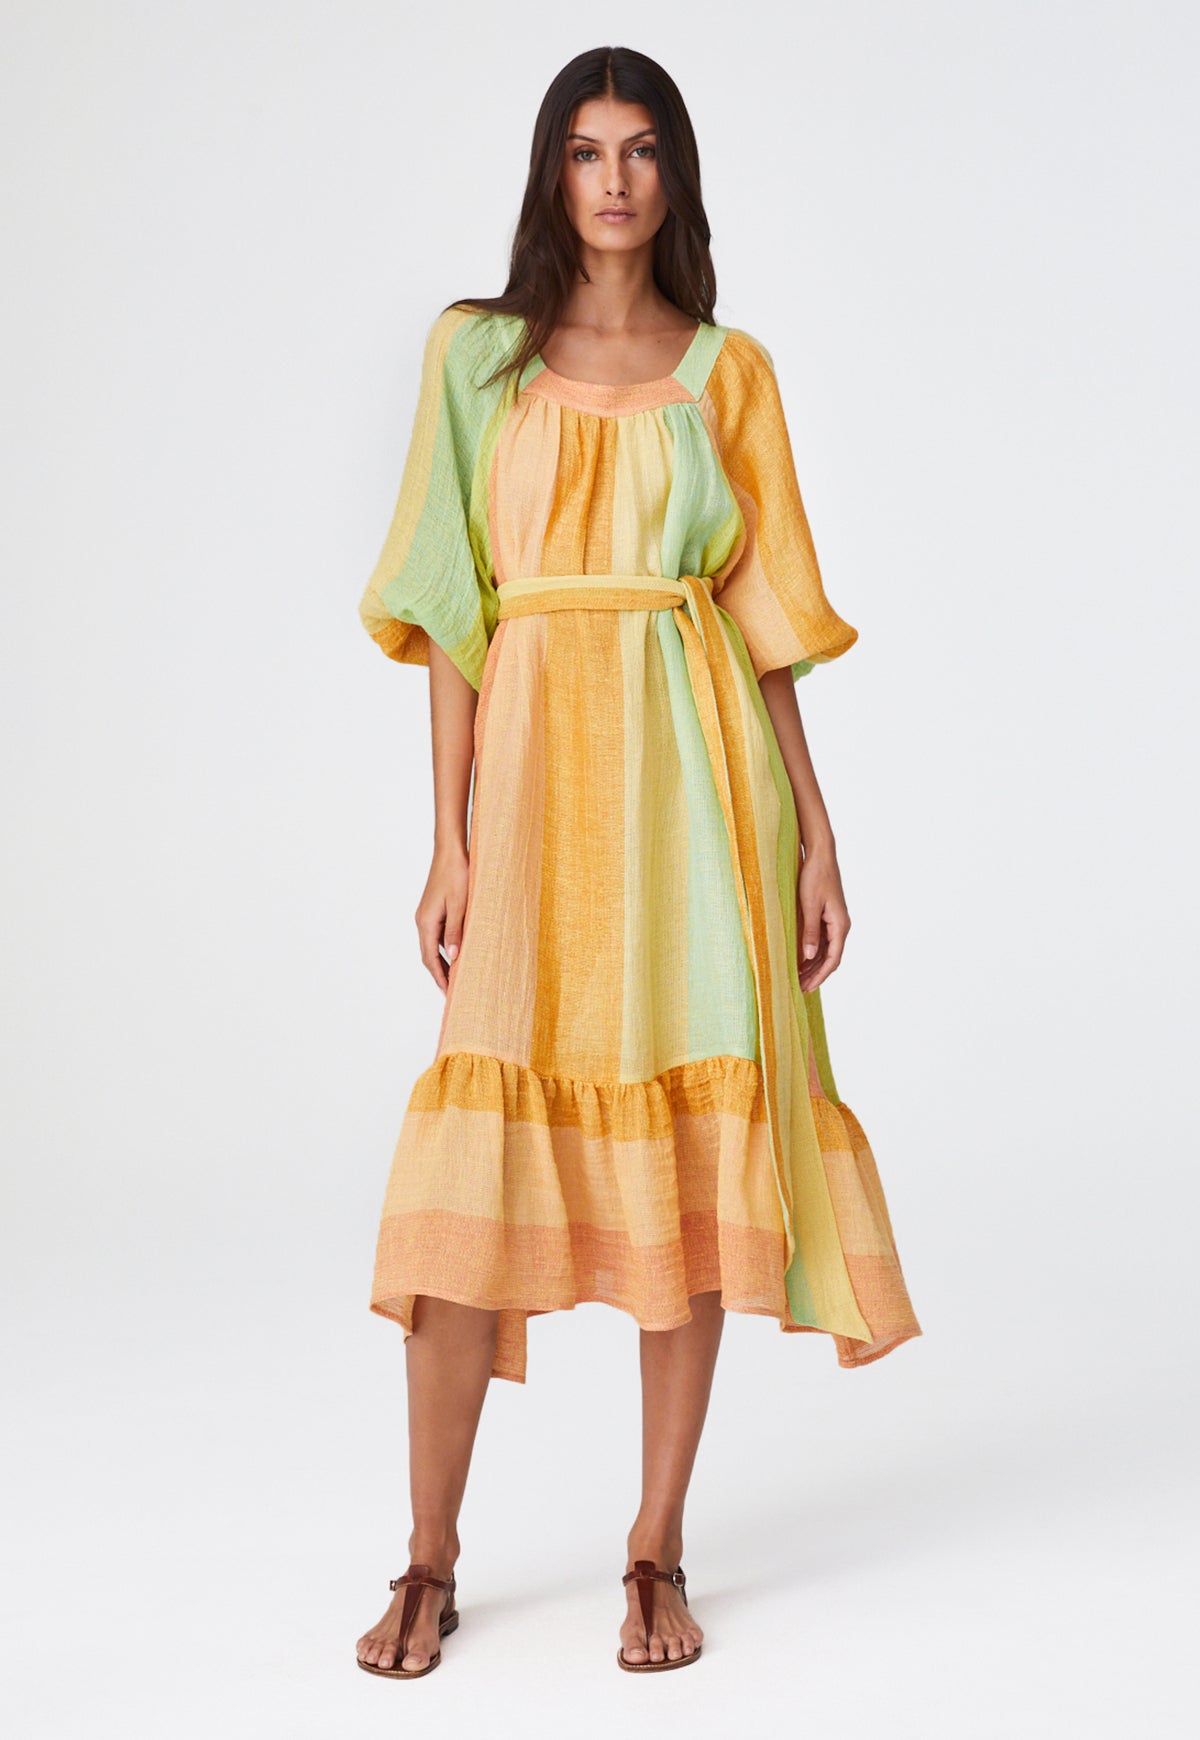 THE LAURE DRESS in CITRUS AWNING STRIPED GAUZE